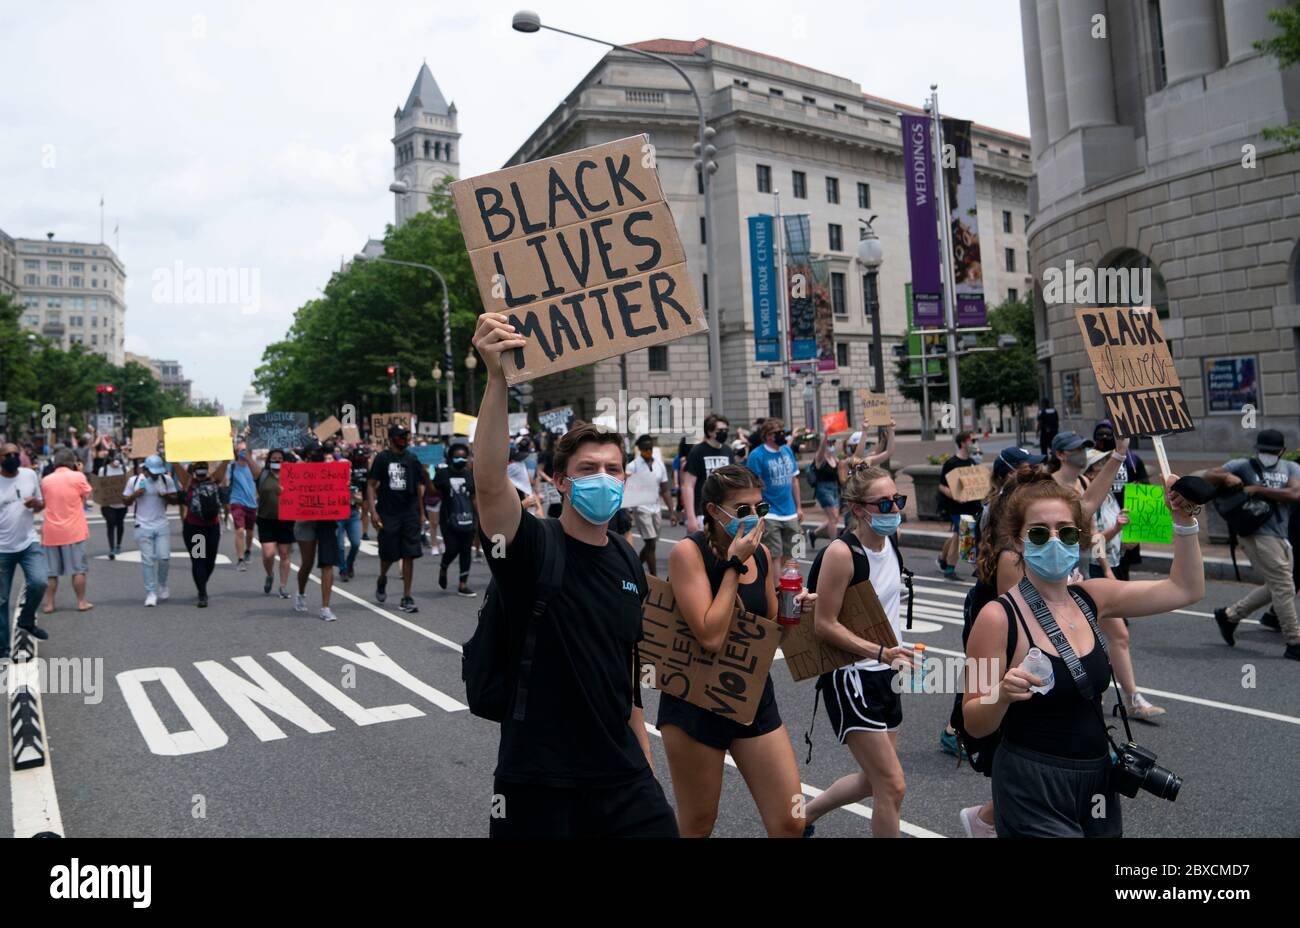 Washington, USA. 6th June, 2020. Protesters march near the Capitol Hill during a demonstration over the death of George Floyd in Washington, DC, the United States, on June 6, 2020. Chanting slogans while holding signs, thousands of protesters marched to Washington, DC on Saturday, staging what is expected to be the largest demonstration in the nation's capital against racial injustice and police brutality. Credit: Liu Jie/Xinhua/Alamy Live News Stock Photo